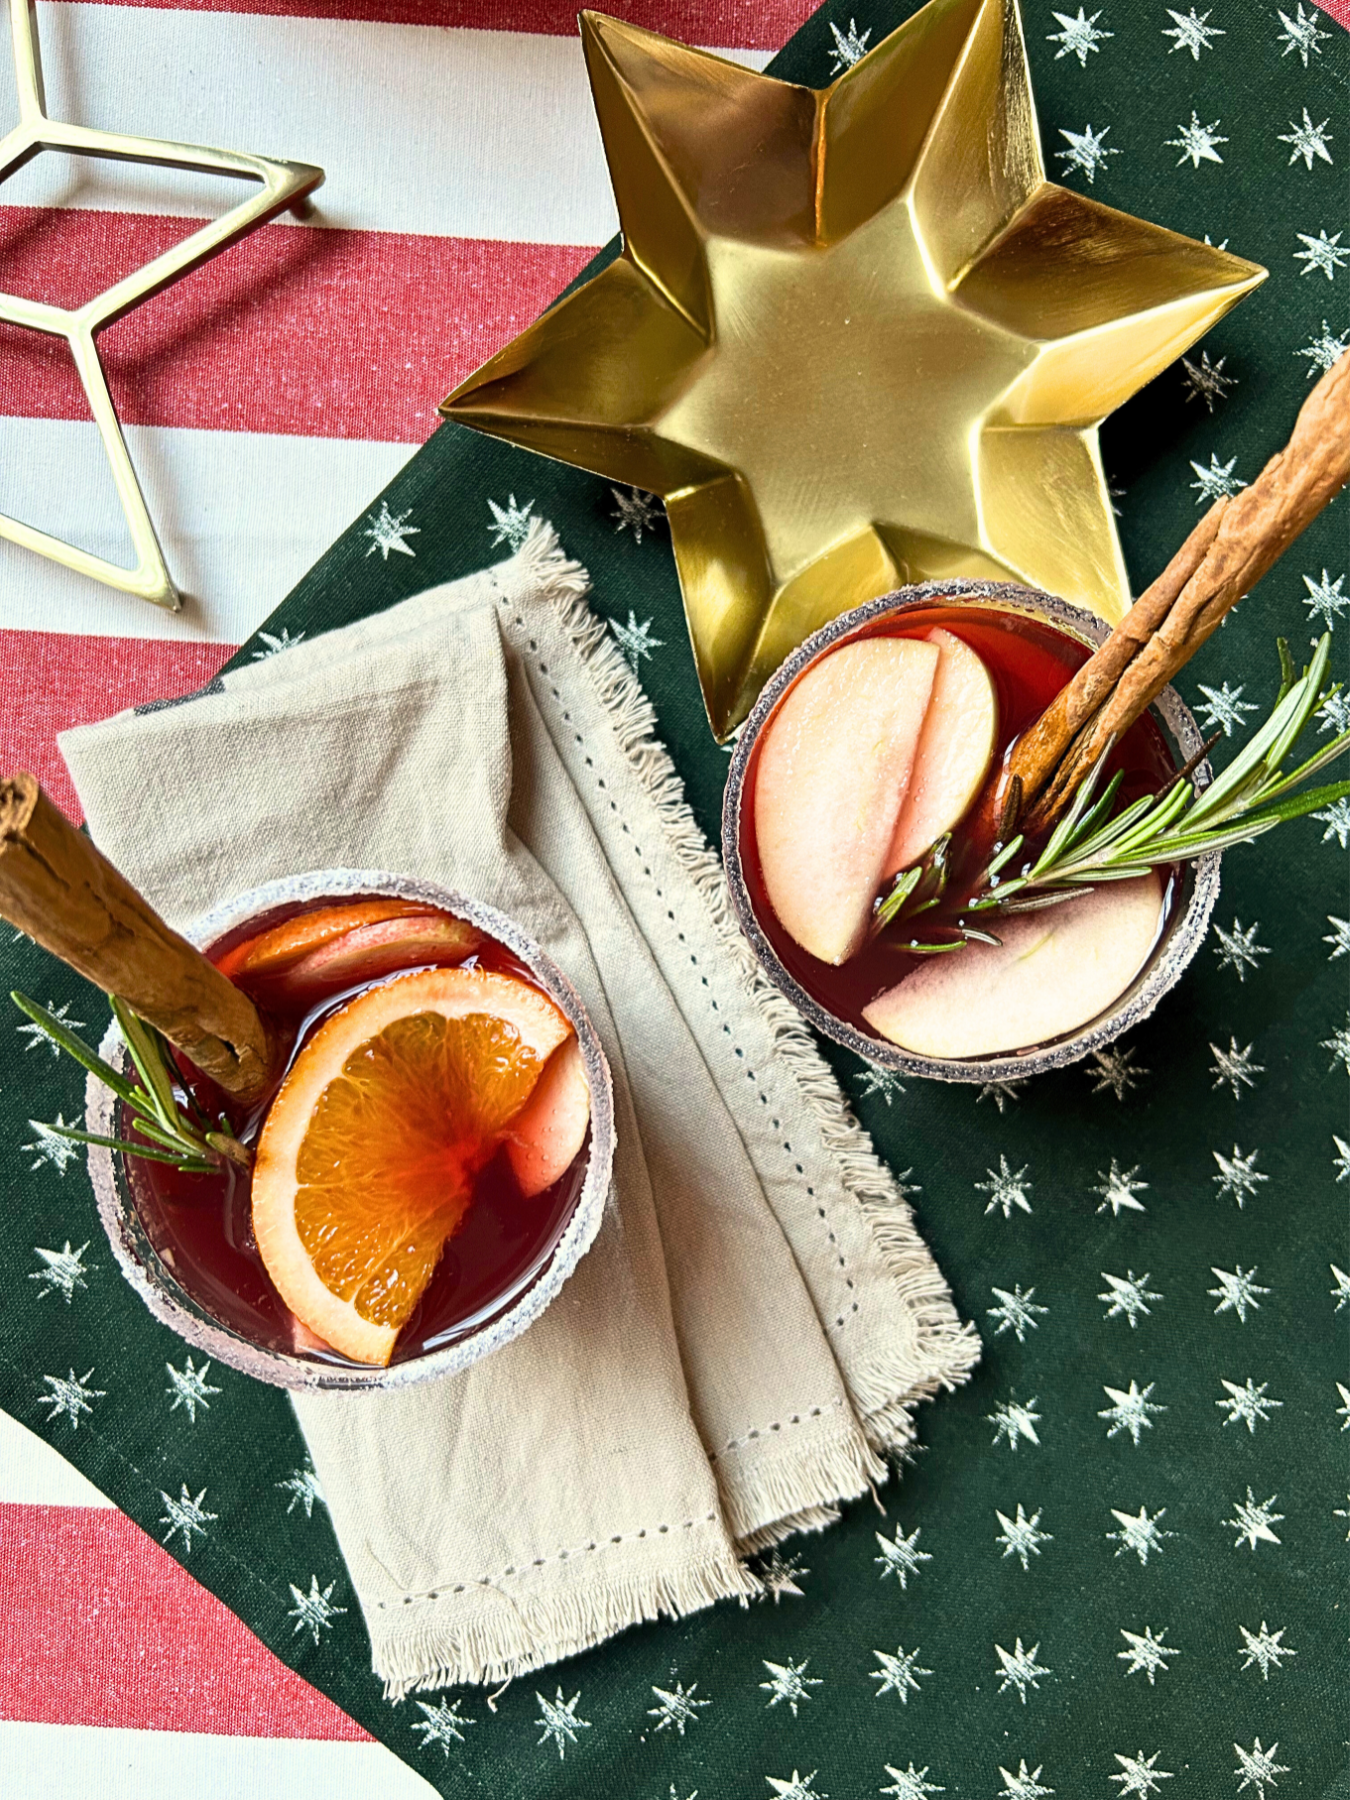 Holiday Sangria - The Defined Dish - Cocktails - Holiday Sangria